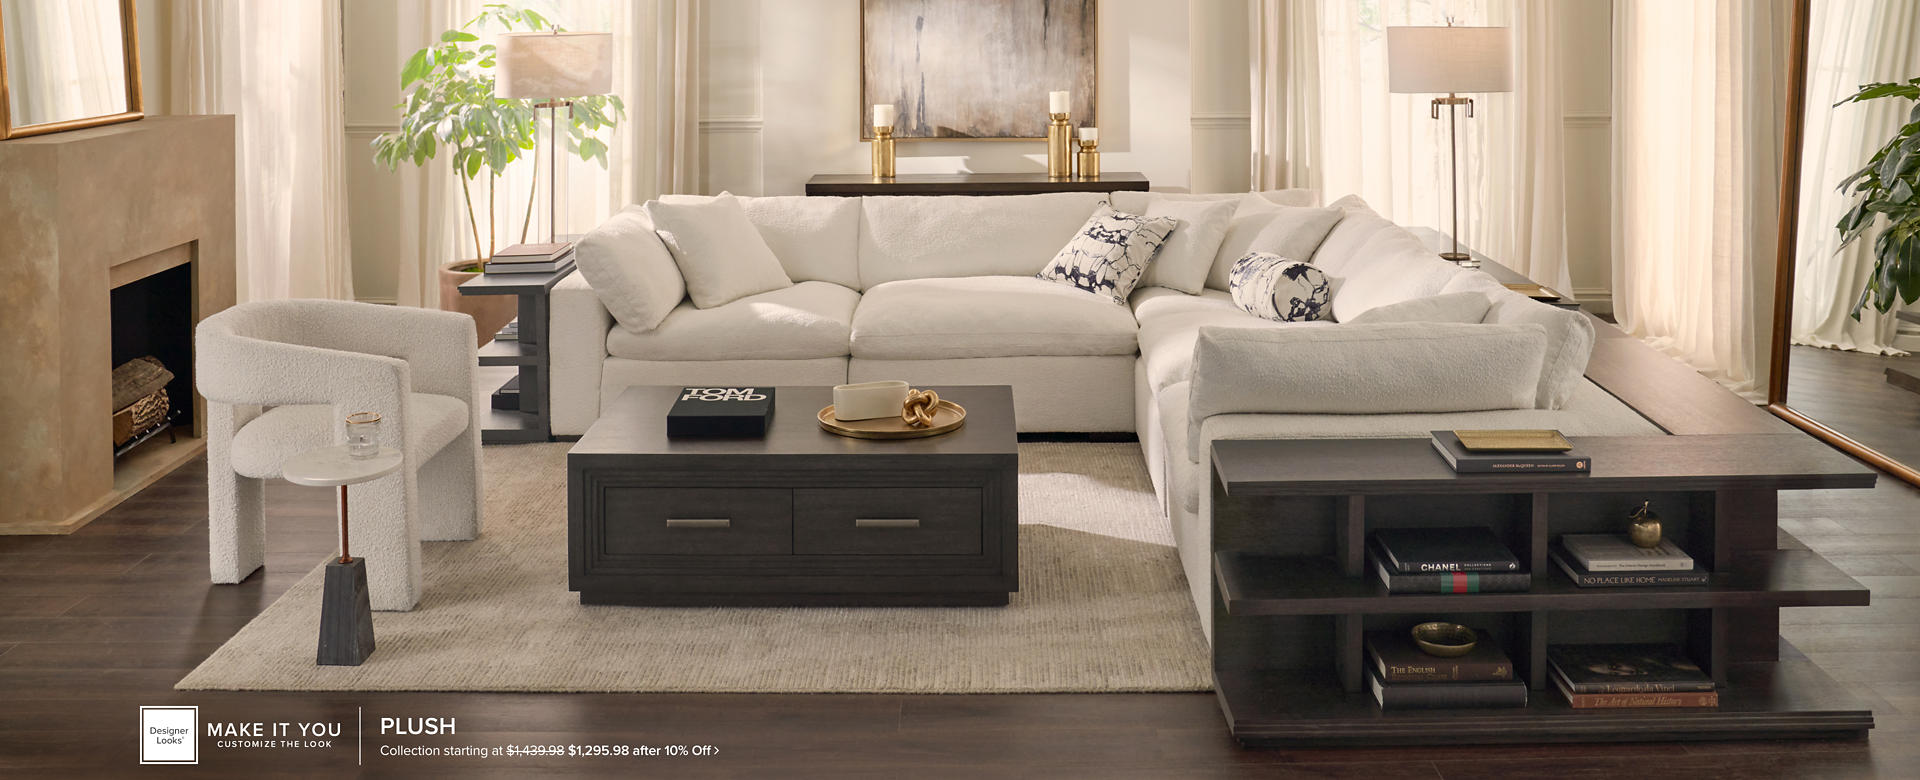 Windsor Park Collection starting at $1169.99 after 10% Off